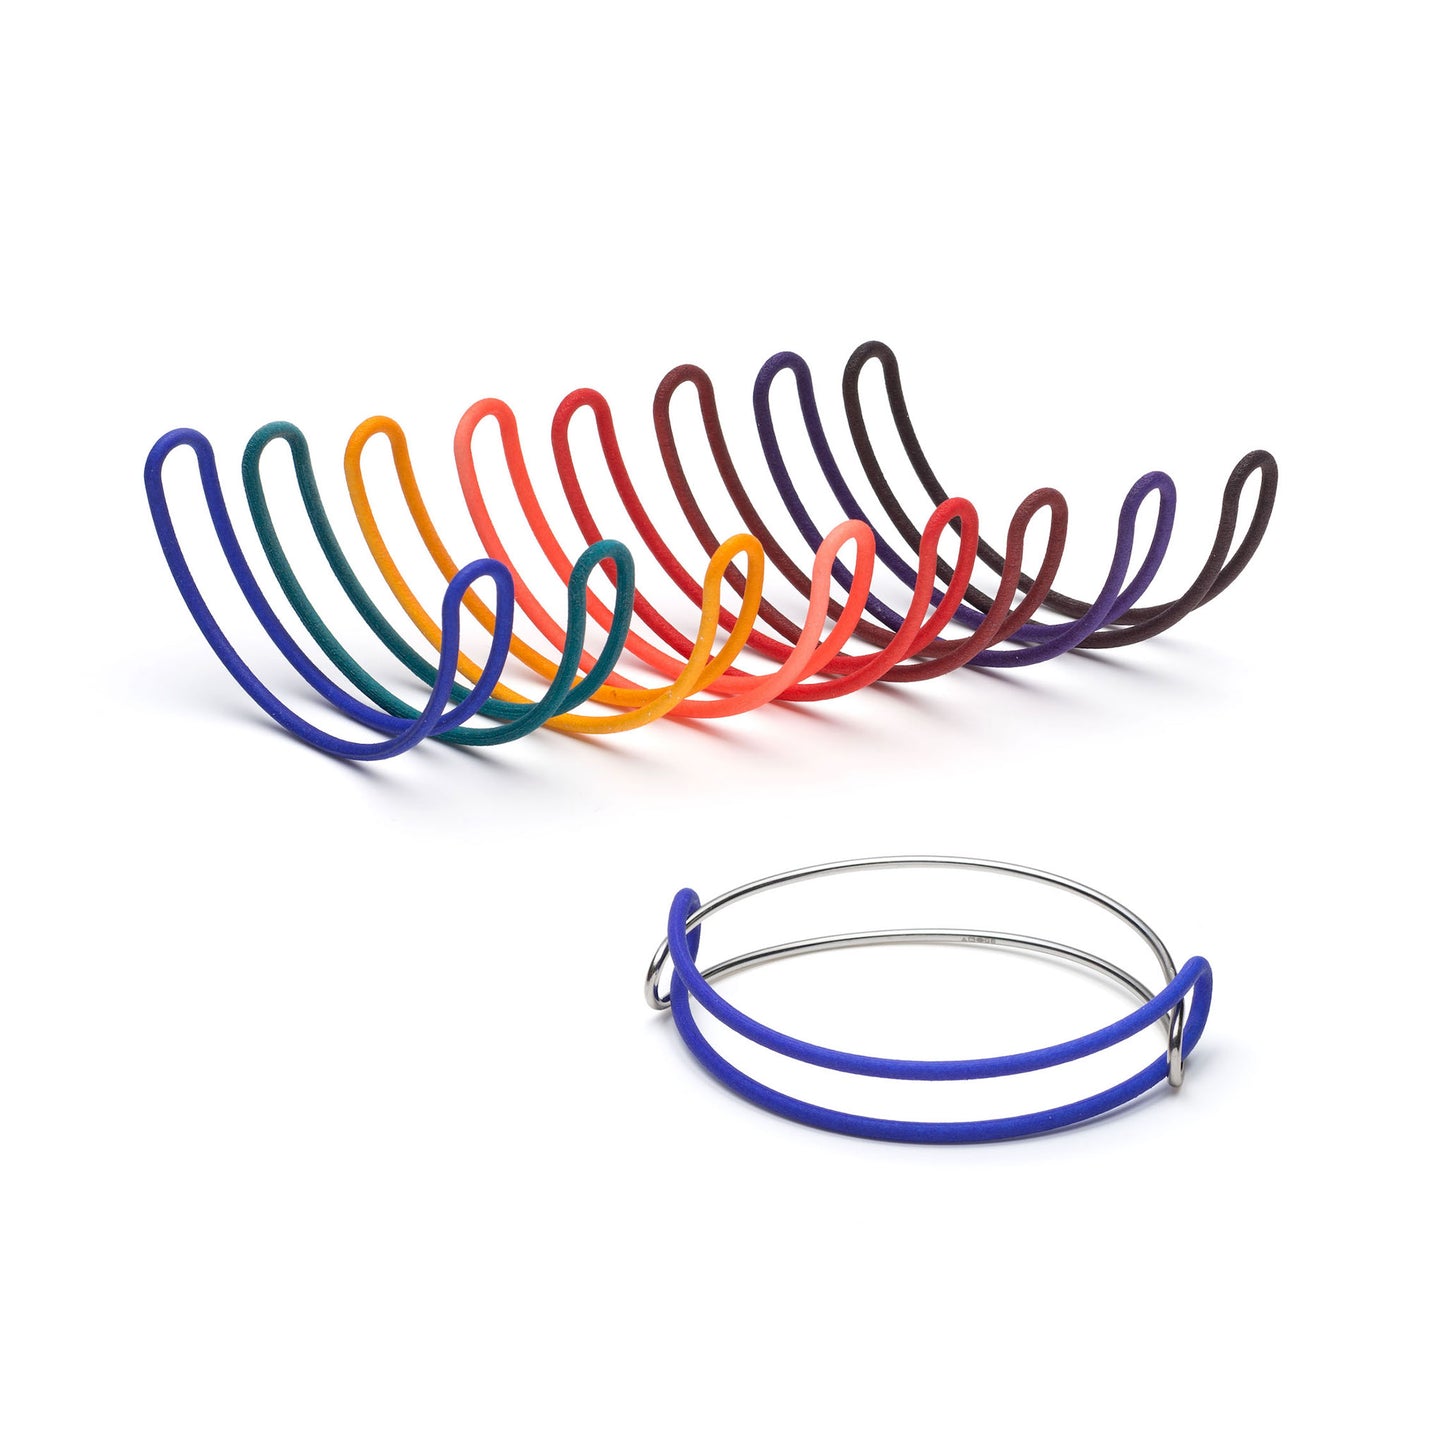 Rainbow colours of the nylon and silver loop bangle by Katy Luxton